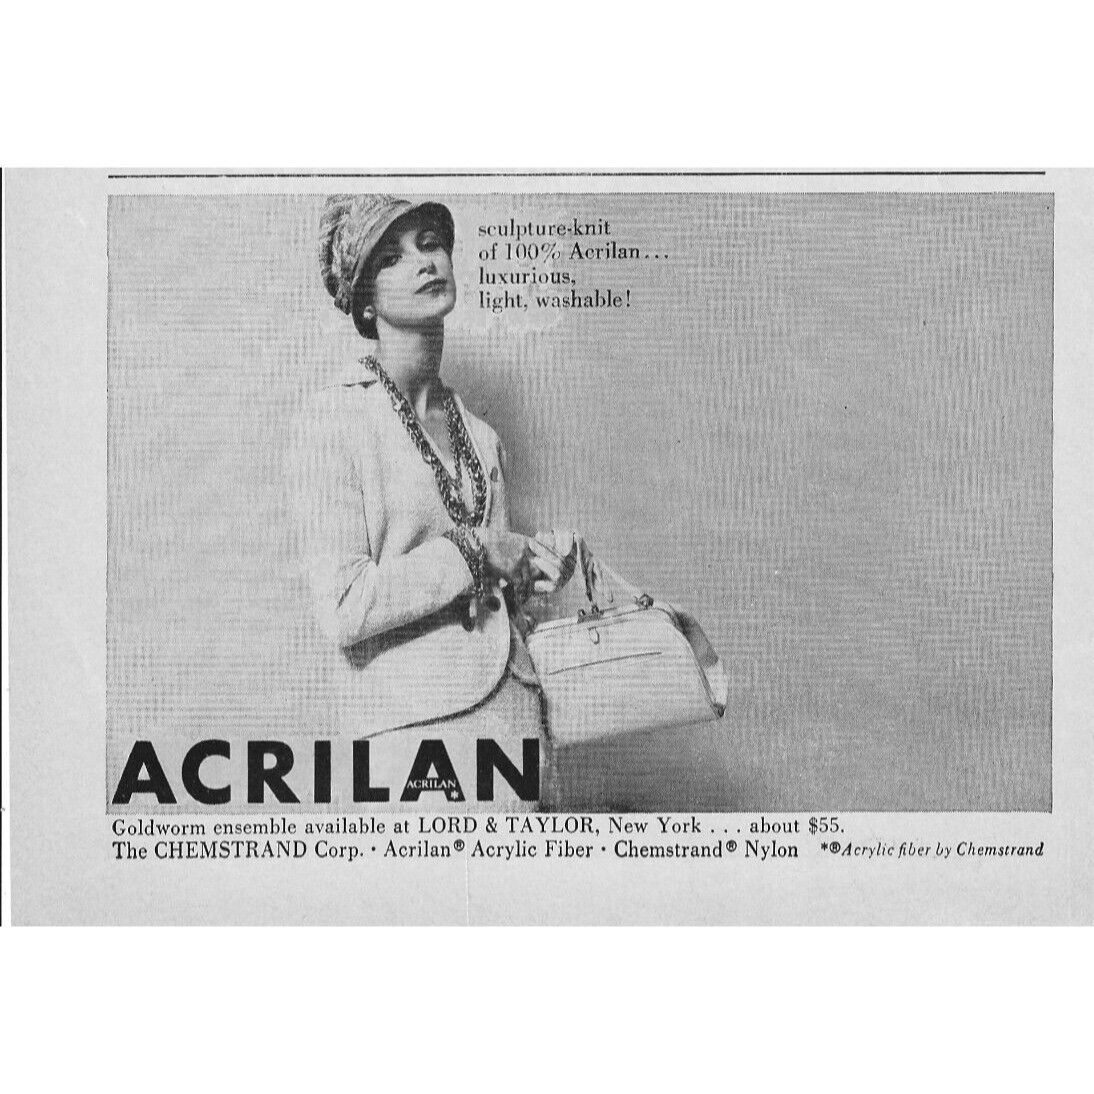 Acrilan Sculpture Knit Lord Taylor NYC 1960s Vintage Print Ad 9 inch W